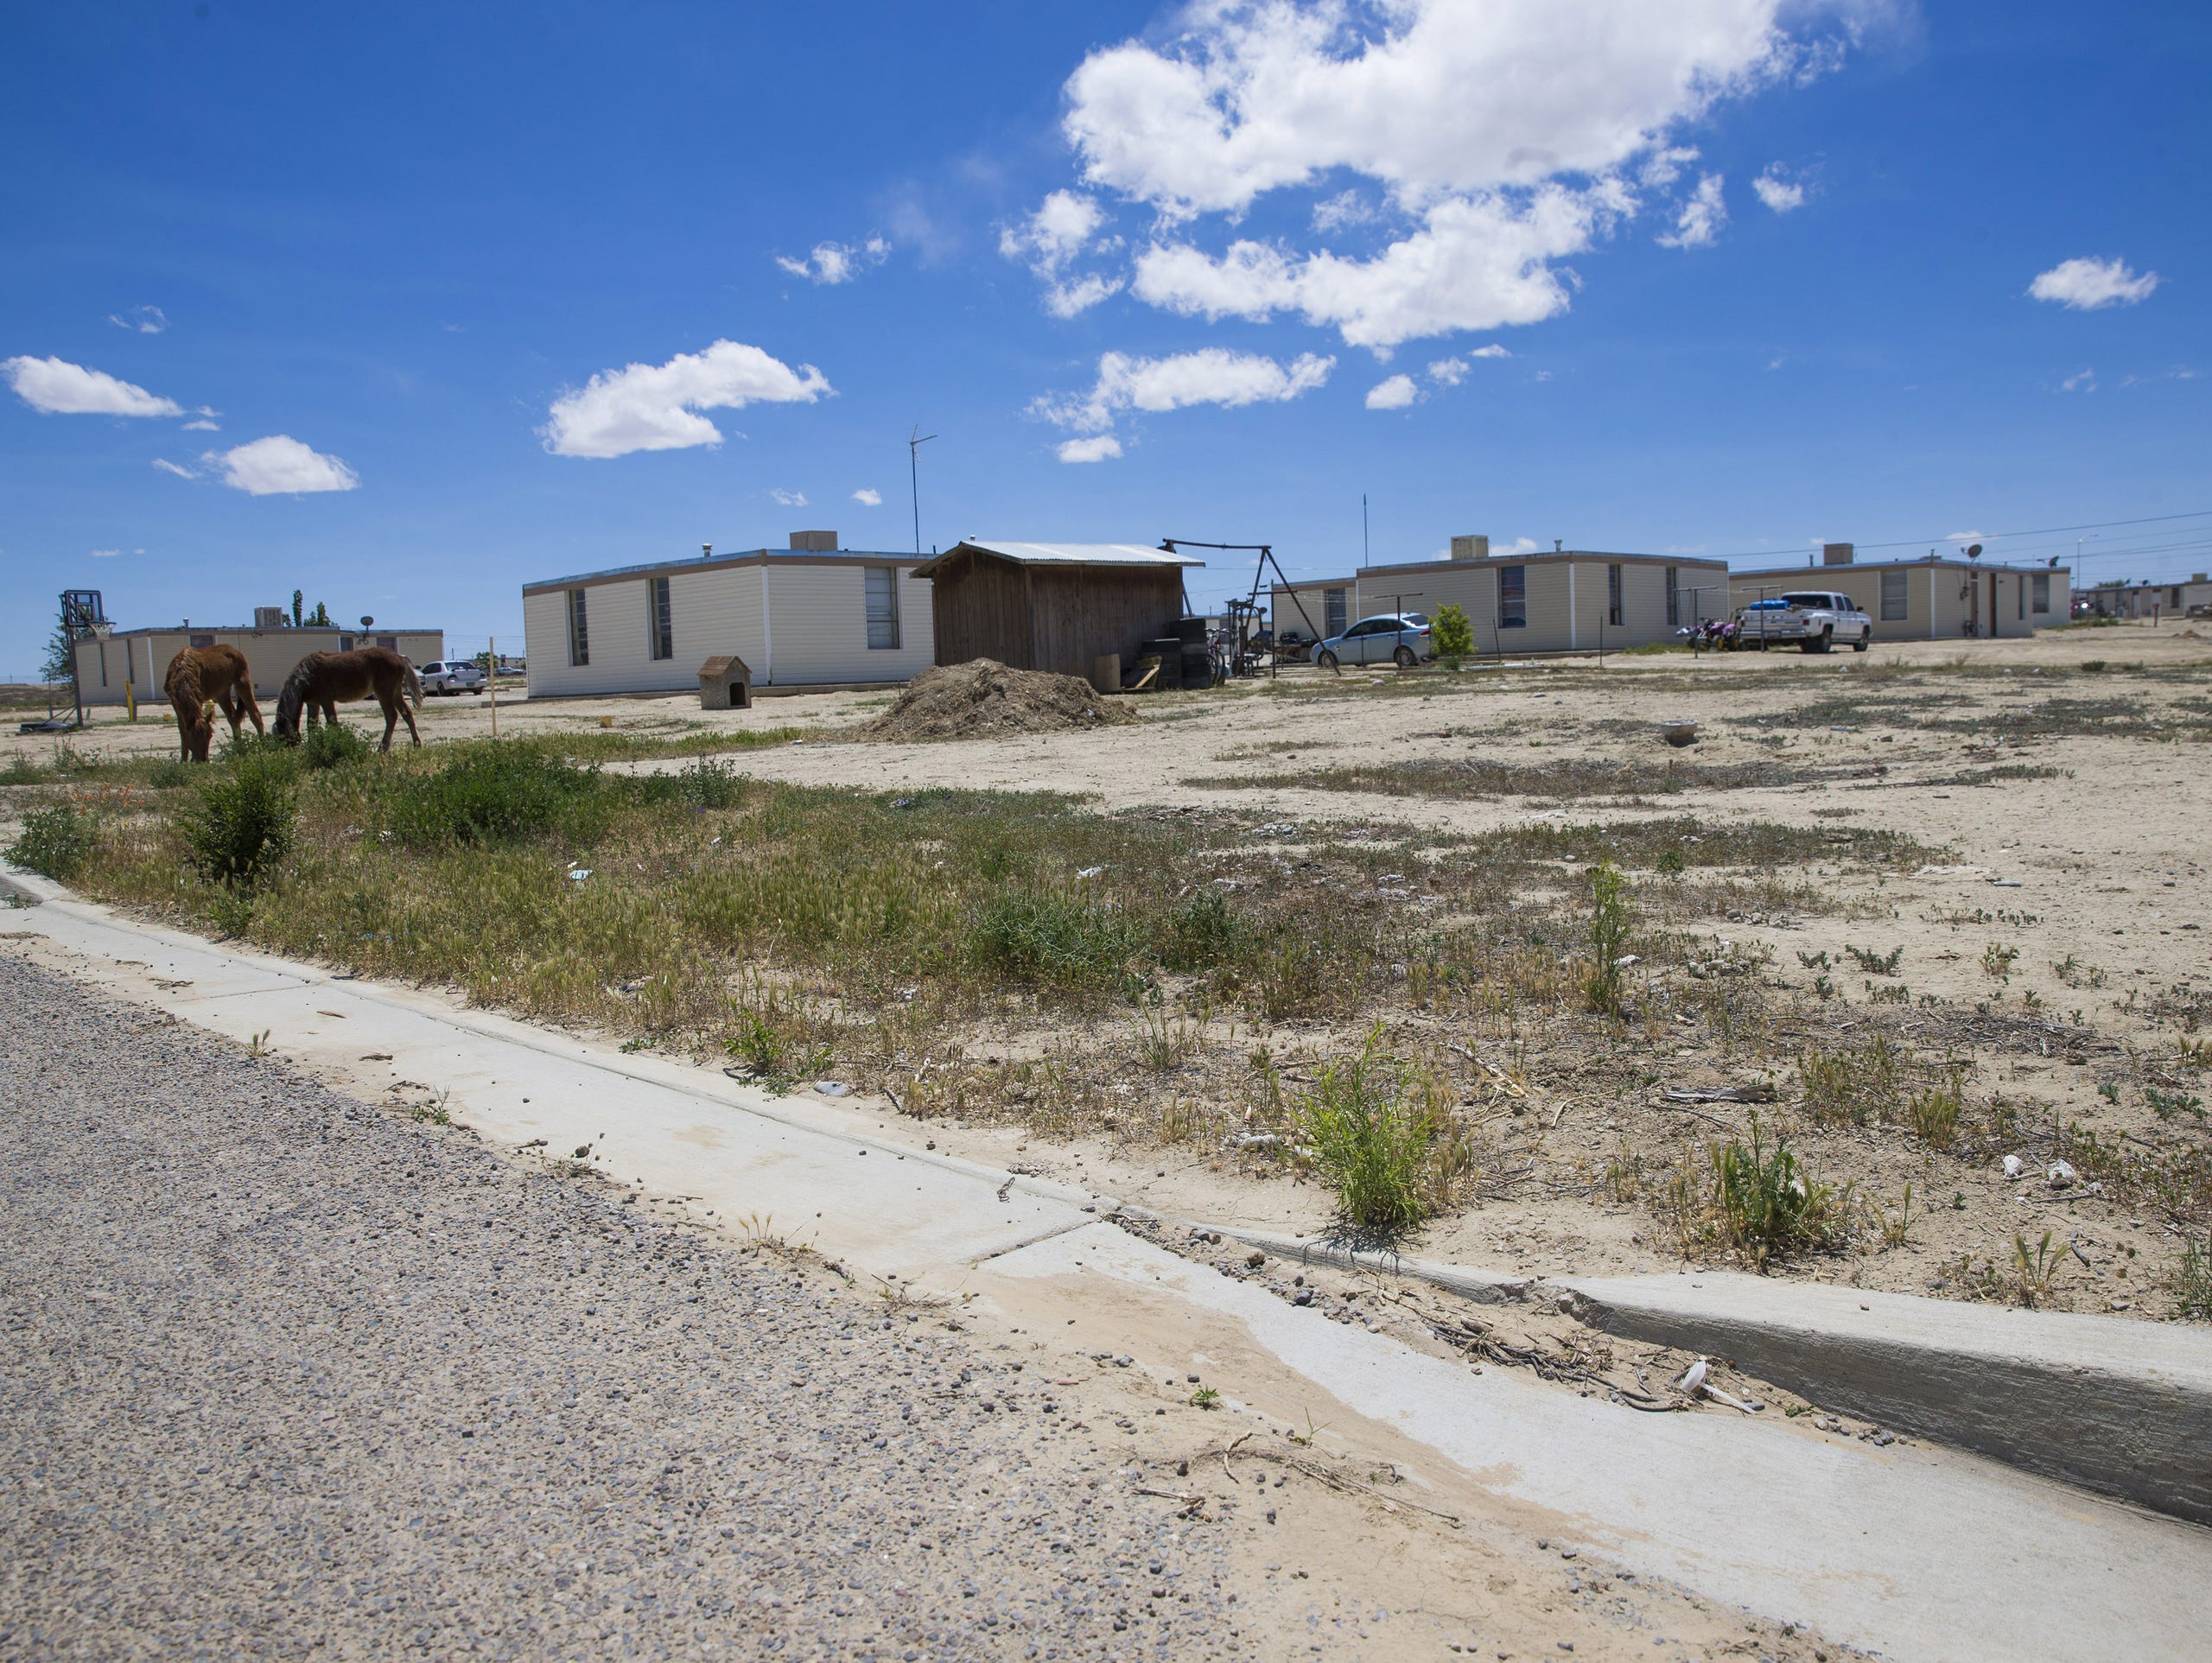 Sen. John McCain's report calls for a new board of directors at the Navajo Housing Authority, possible cutbacks in Navajo housing funds by Congress, and the creation of a separate agency to handle new-home development for the tribe.